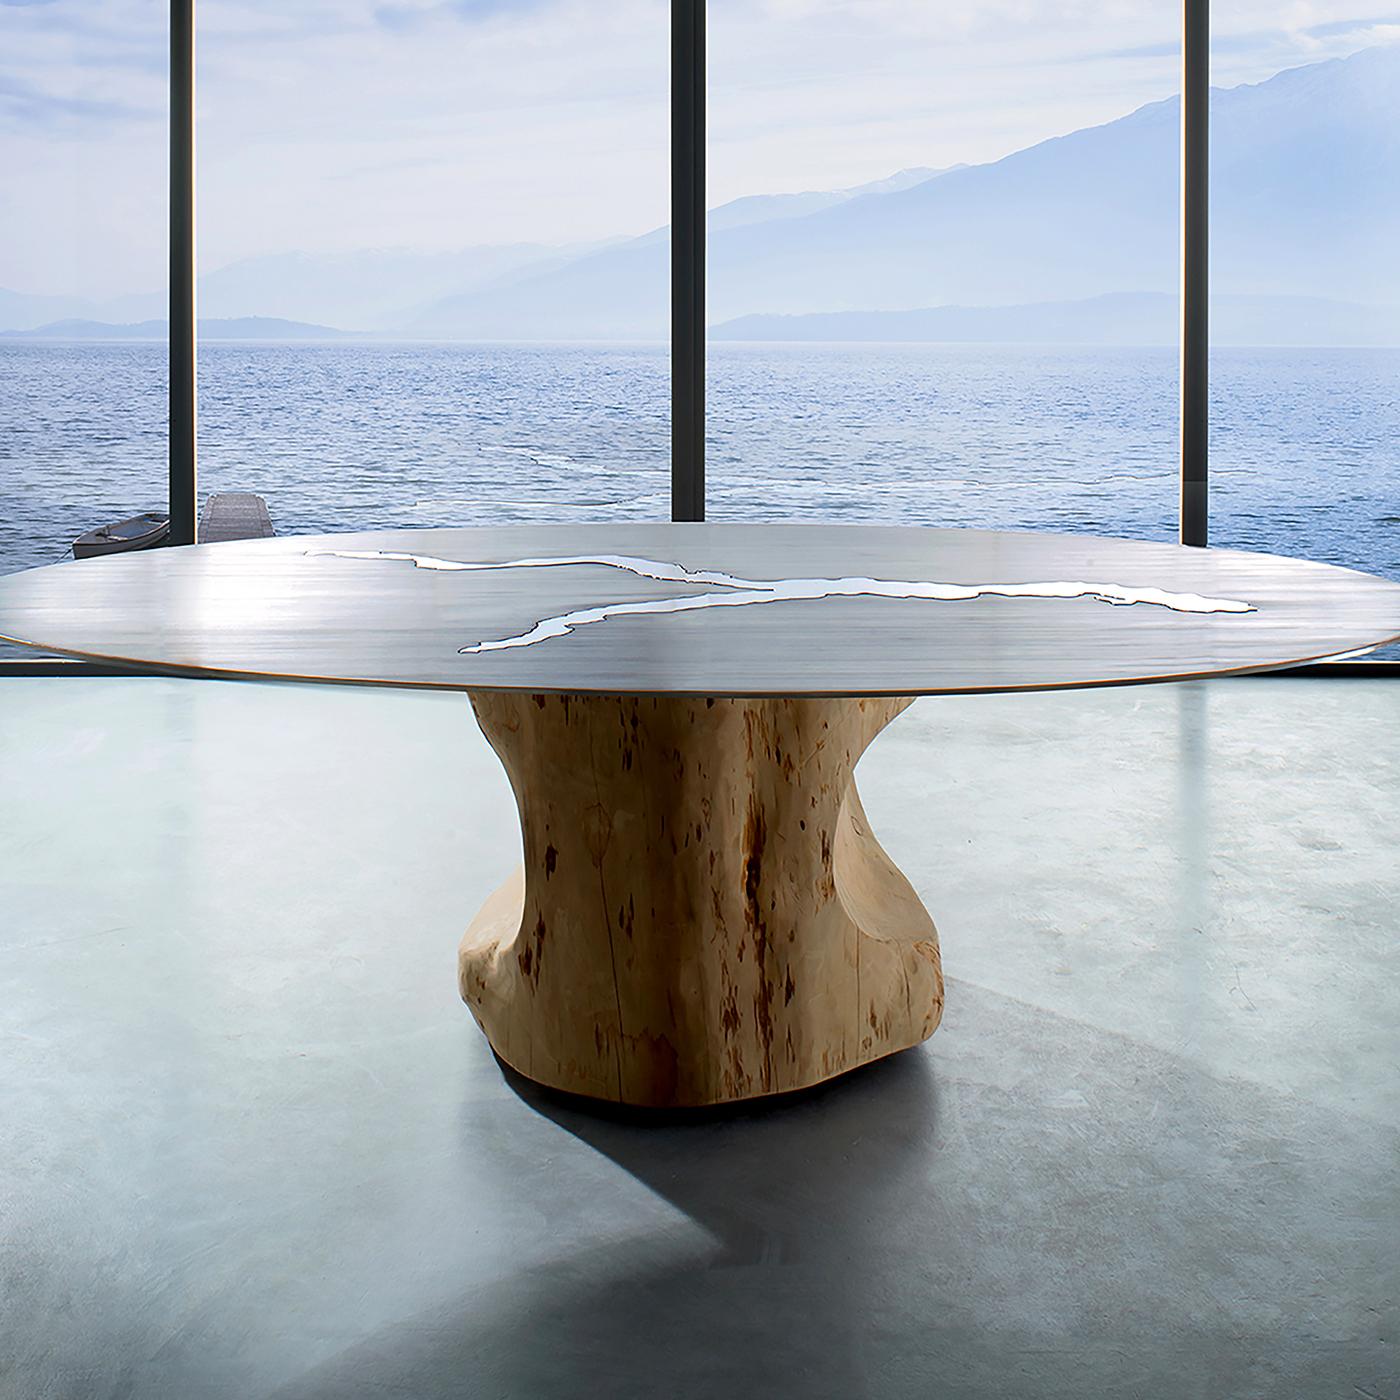 Inspired by the magic allure of Lake Como, this table boasts the charming silhouette of the lake in mirror finish on the satin-finished top. Made of stainless steel, the top is supported by a smooth tree log hailing from the mountains surrounding